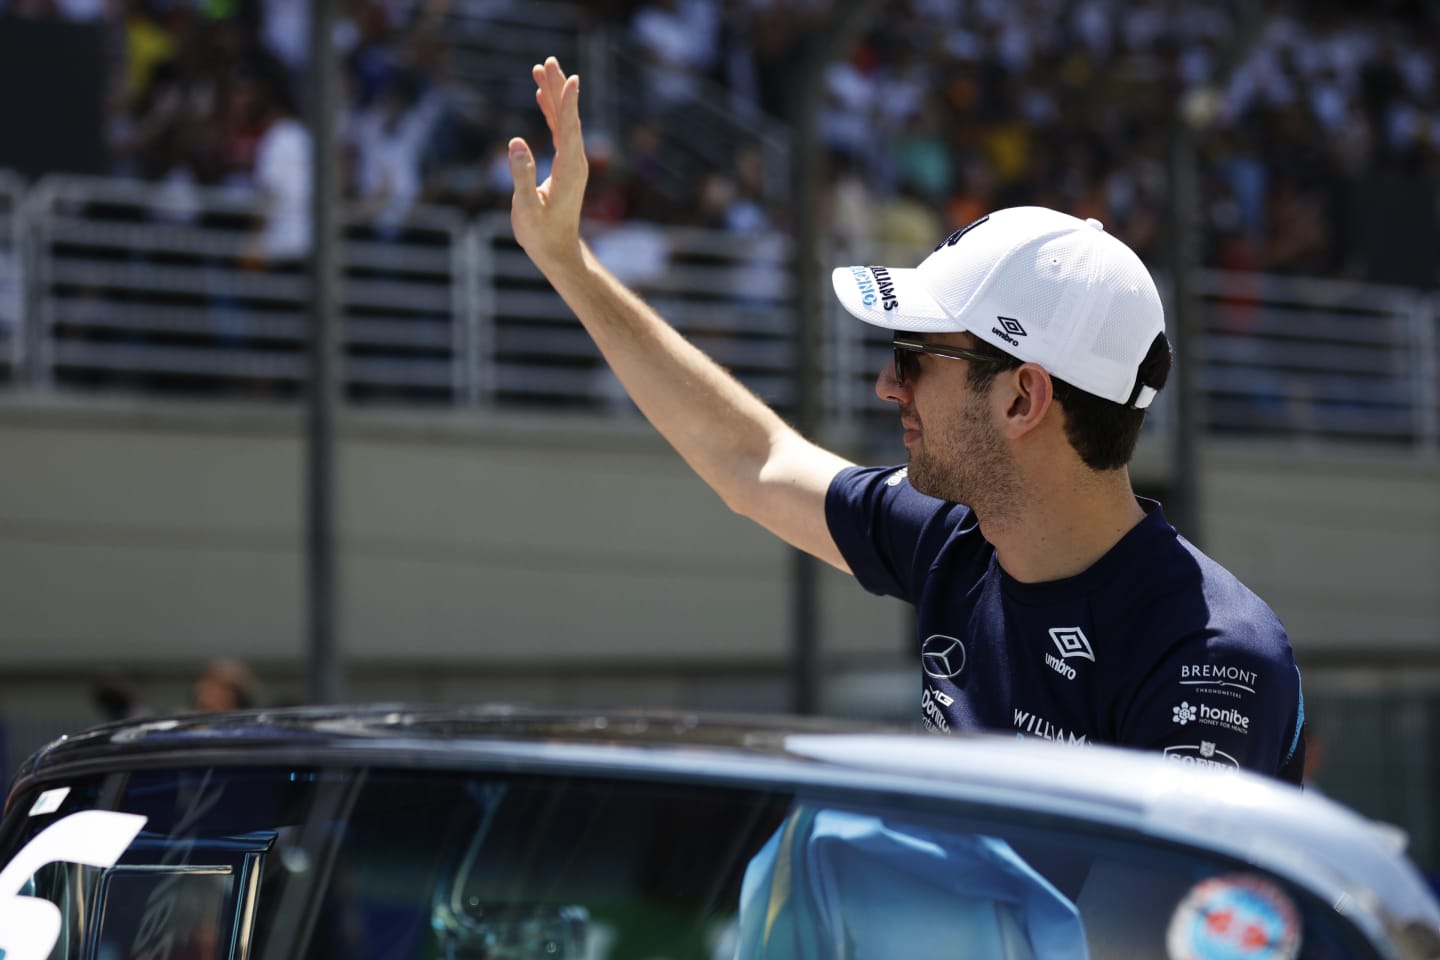 SAO PAULO, BRAZIL - NOVEMBER 13: Nicholas Latifi of Canada and Williams waves to the crowd on the drivers parade prior to the F1 Grand Prix of Brazil at Autodromo Jose Carlos Pace on November 13, 2022 in Sao Paulo, Brazil. (Photo by Jared C. Tilton/Getty Images)